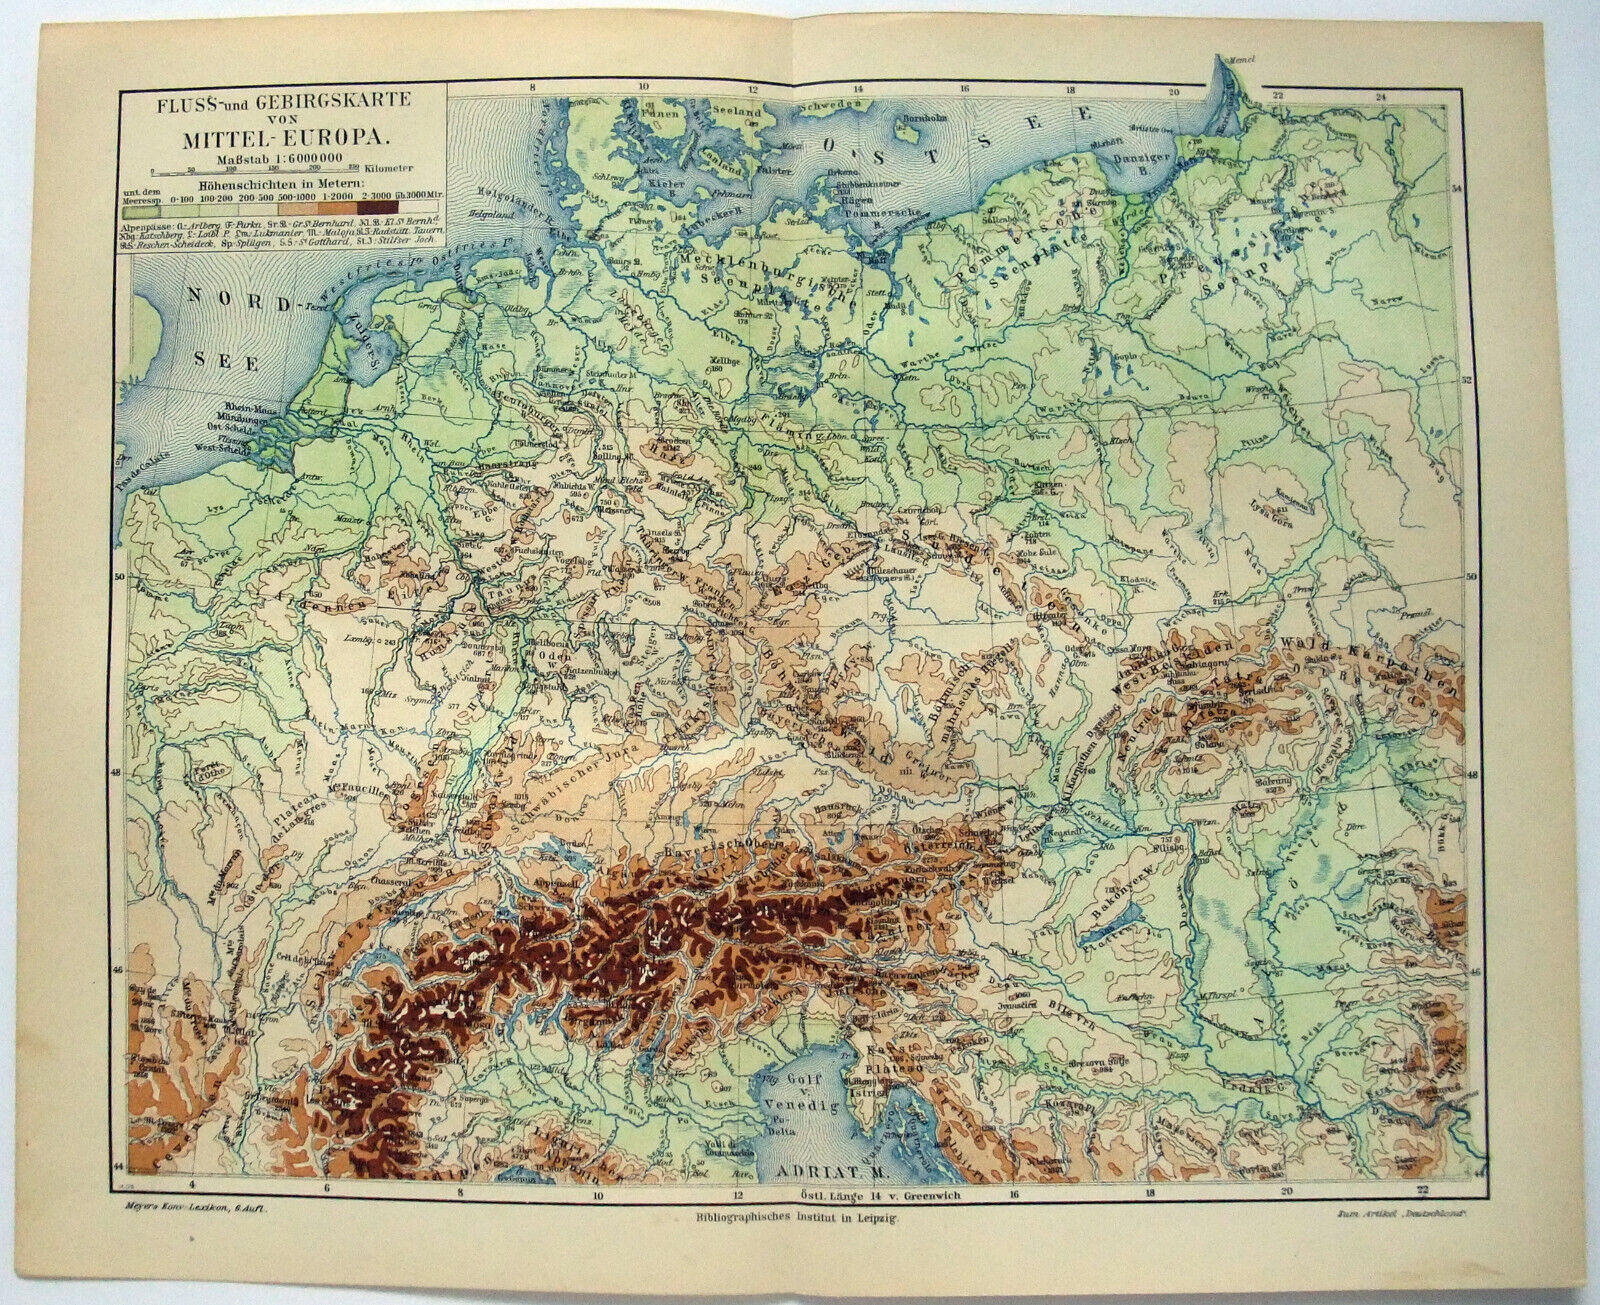 Original 1904 Physical Map of Middle Europe by Meyers